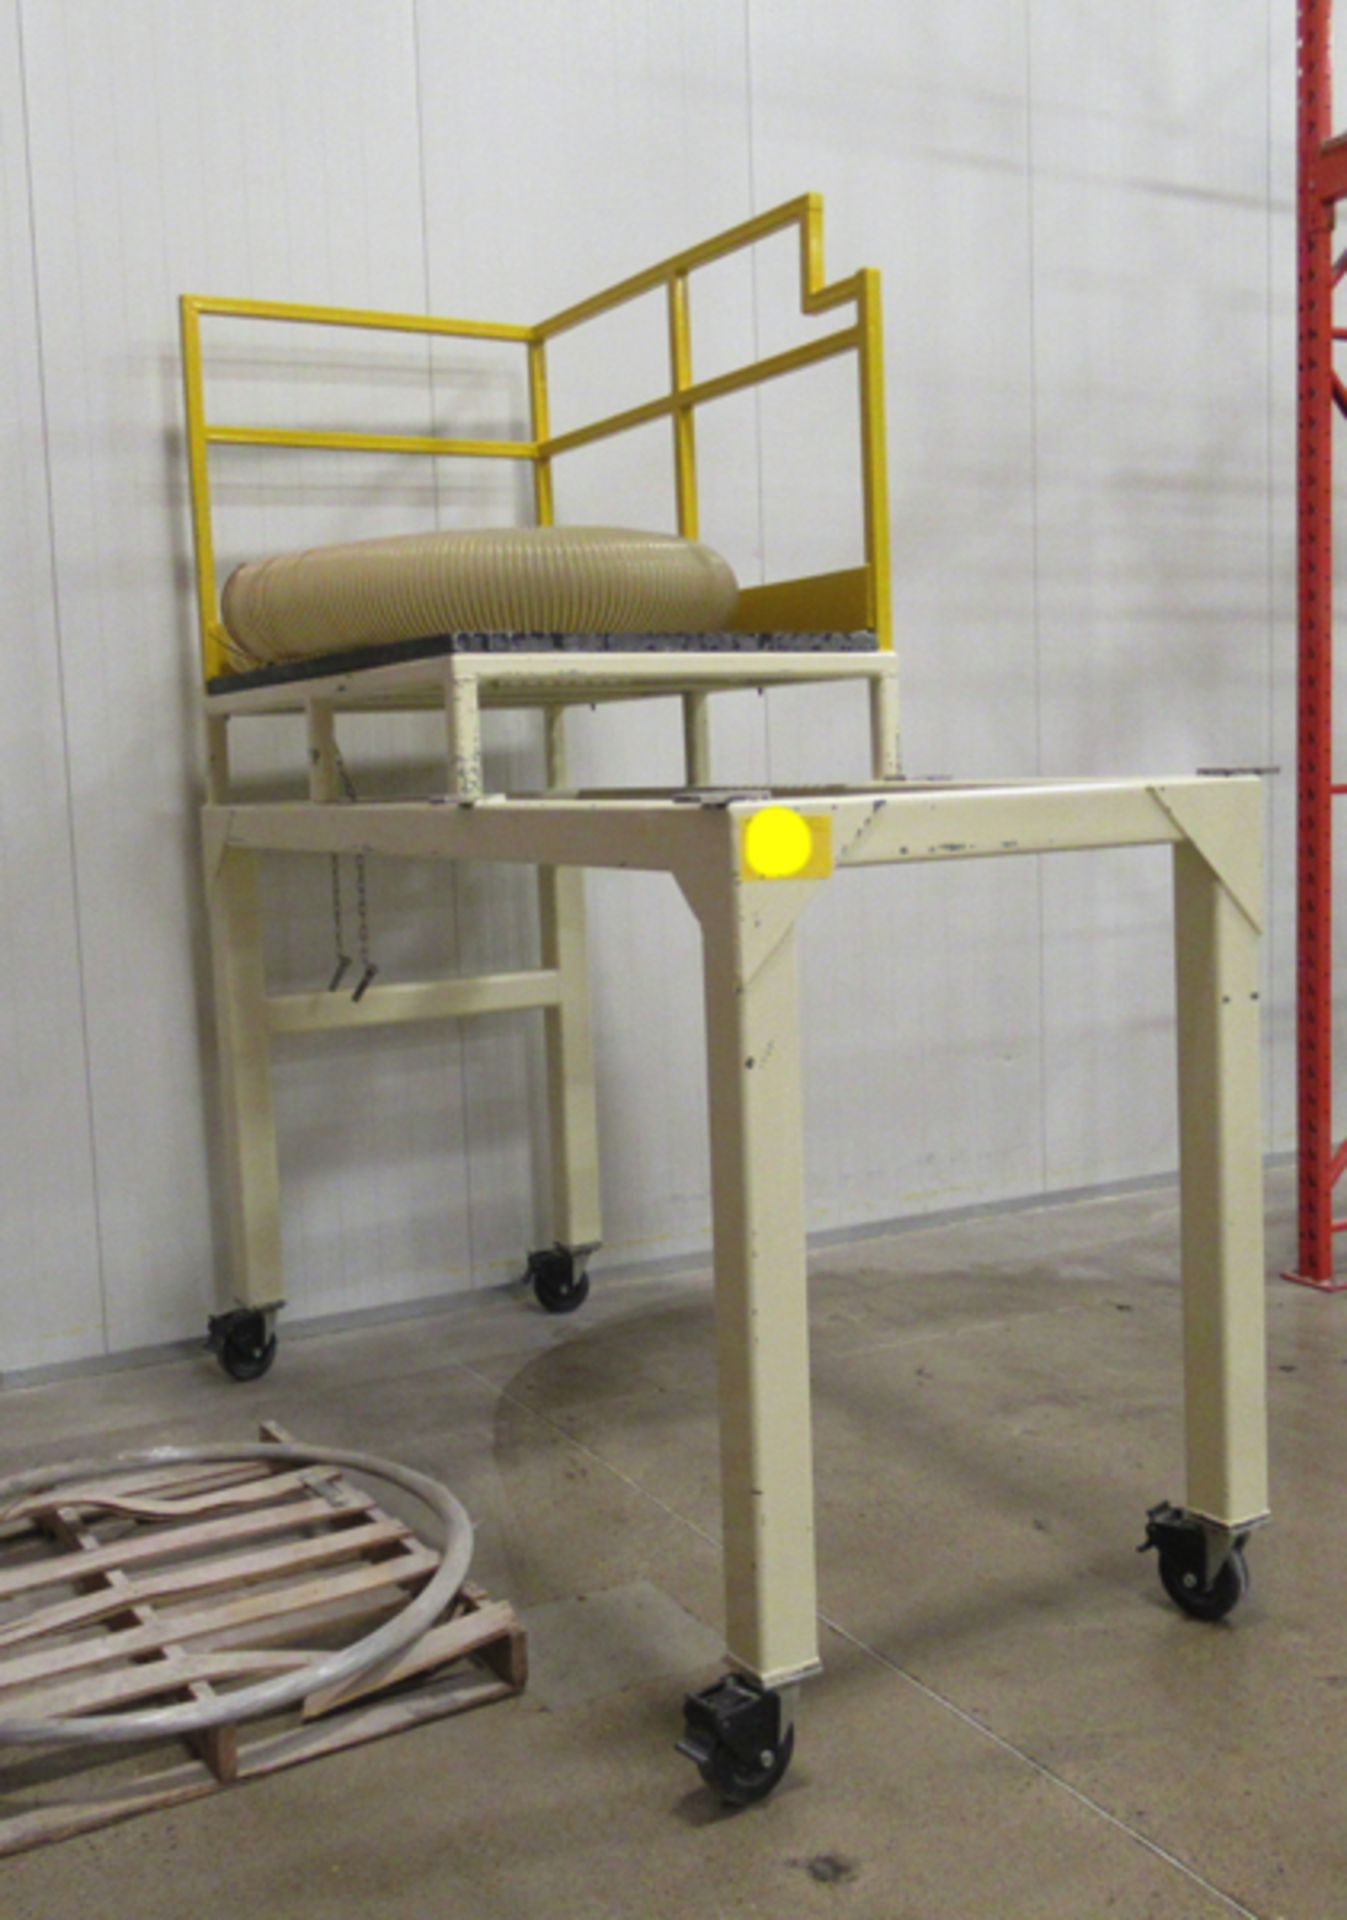 Portable Mezzanine, Previously Used with Kason Sifter in Lot 21A and Ribbon Blender in Lot 21 ( - Image 2 of 3